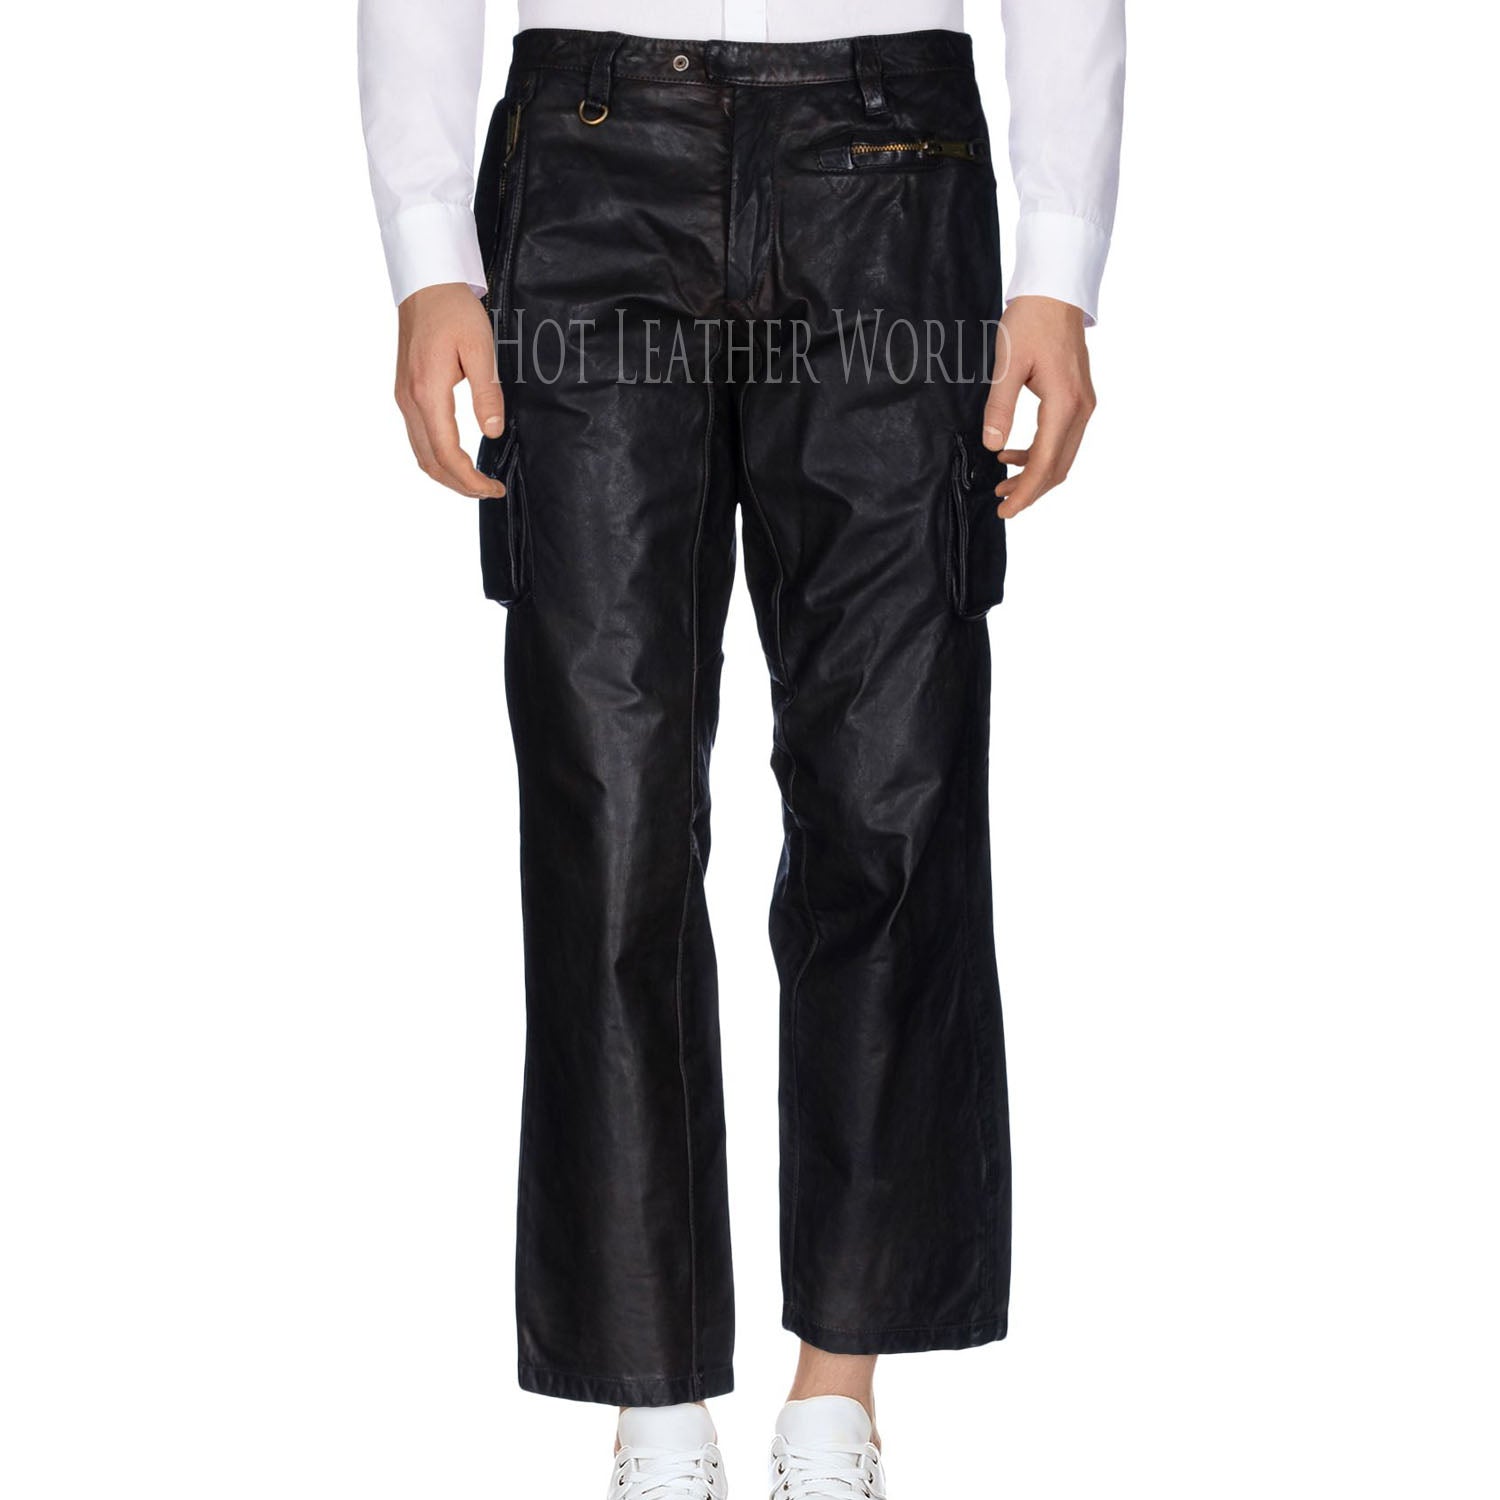 2021 HOT Mens Lace Up Motorcycle Biker Synthetic Leather Long Pants  Nightclub Trousers | Wish